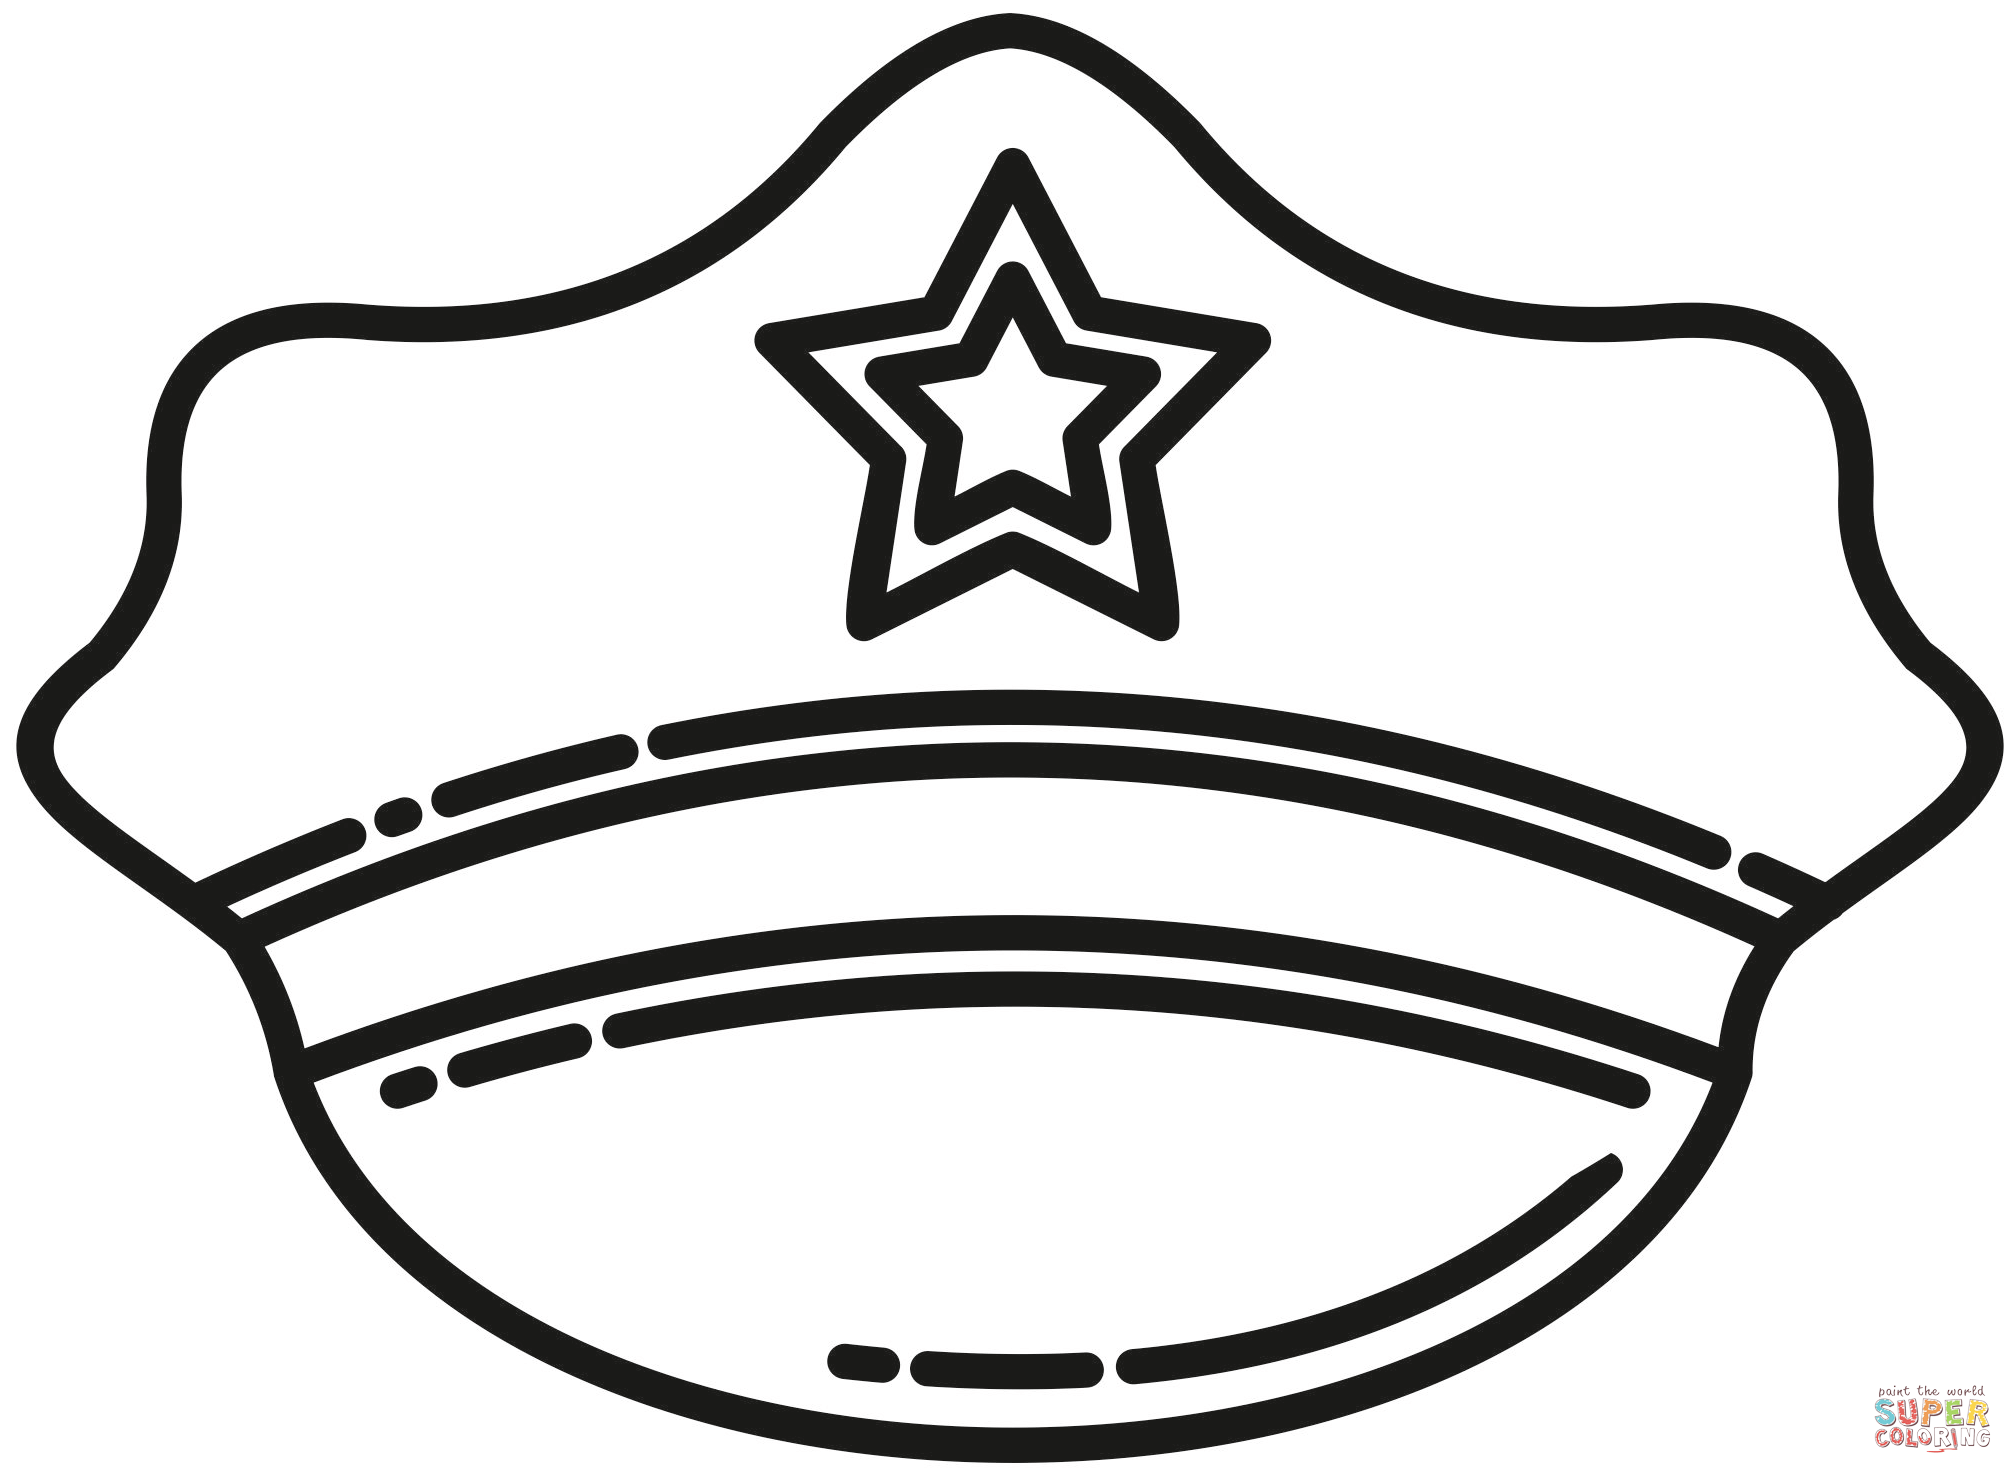 Police hat coloring page free printable coloring pages